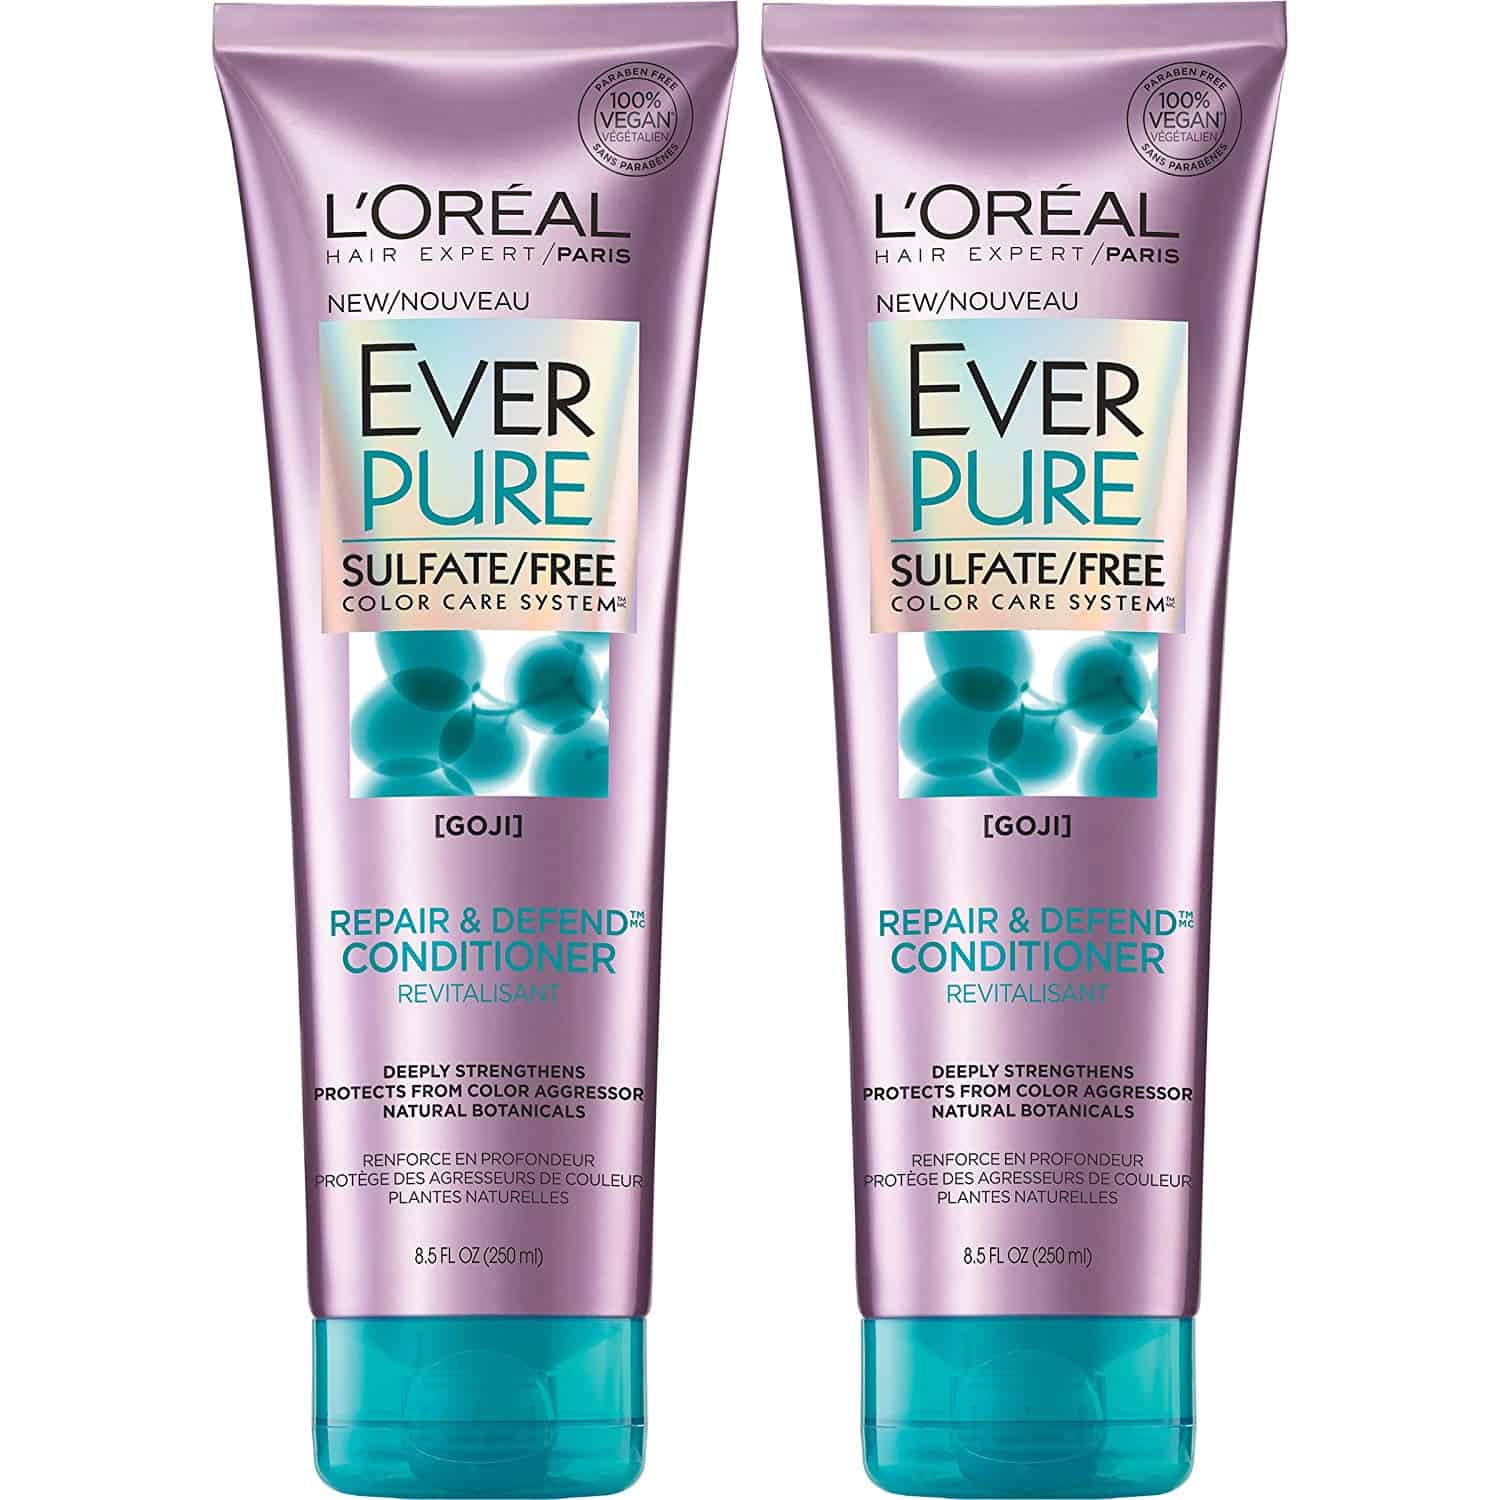 Repair & Defend Conditioner by L’Oreal